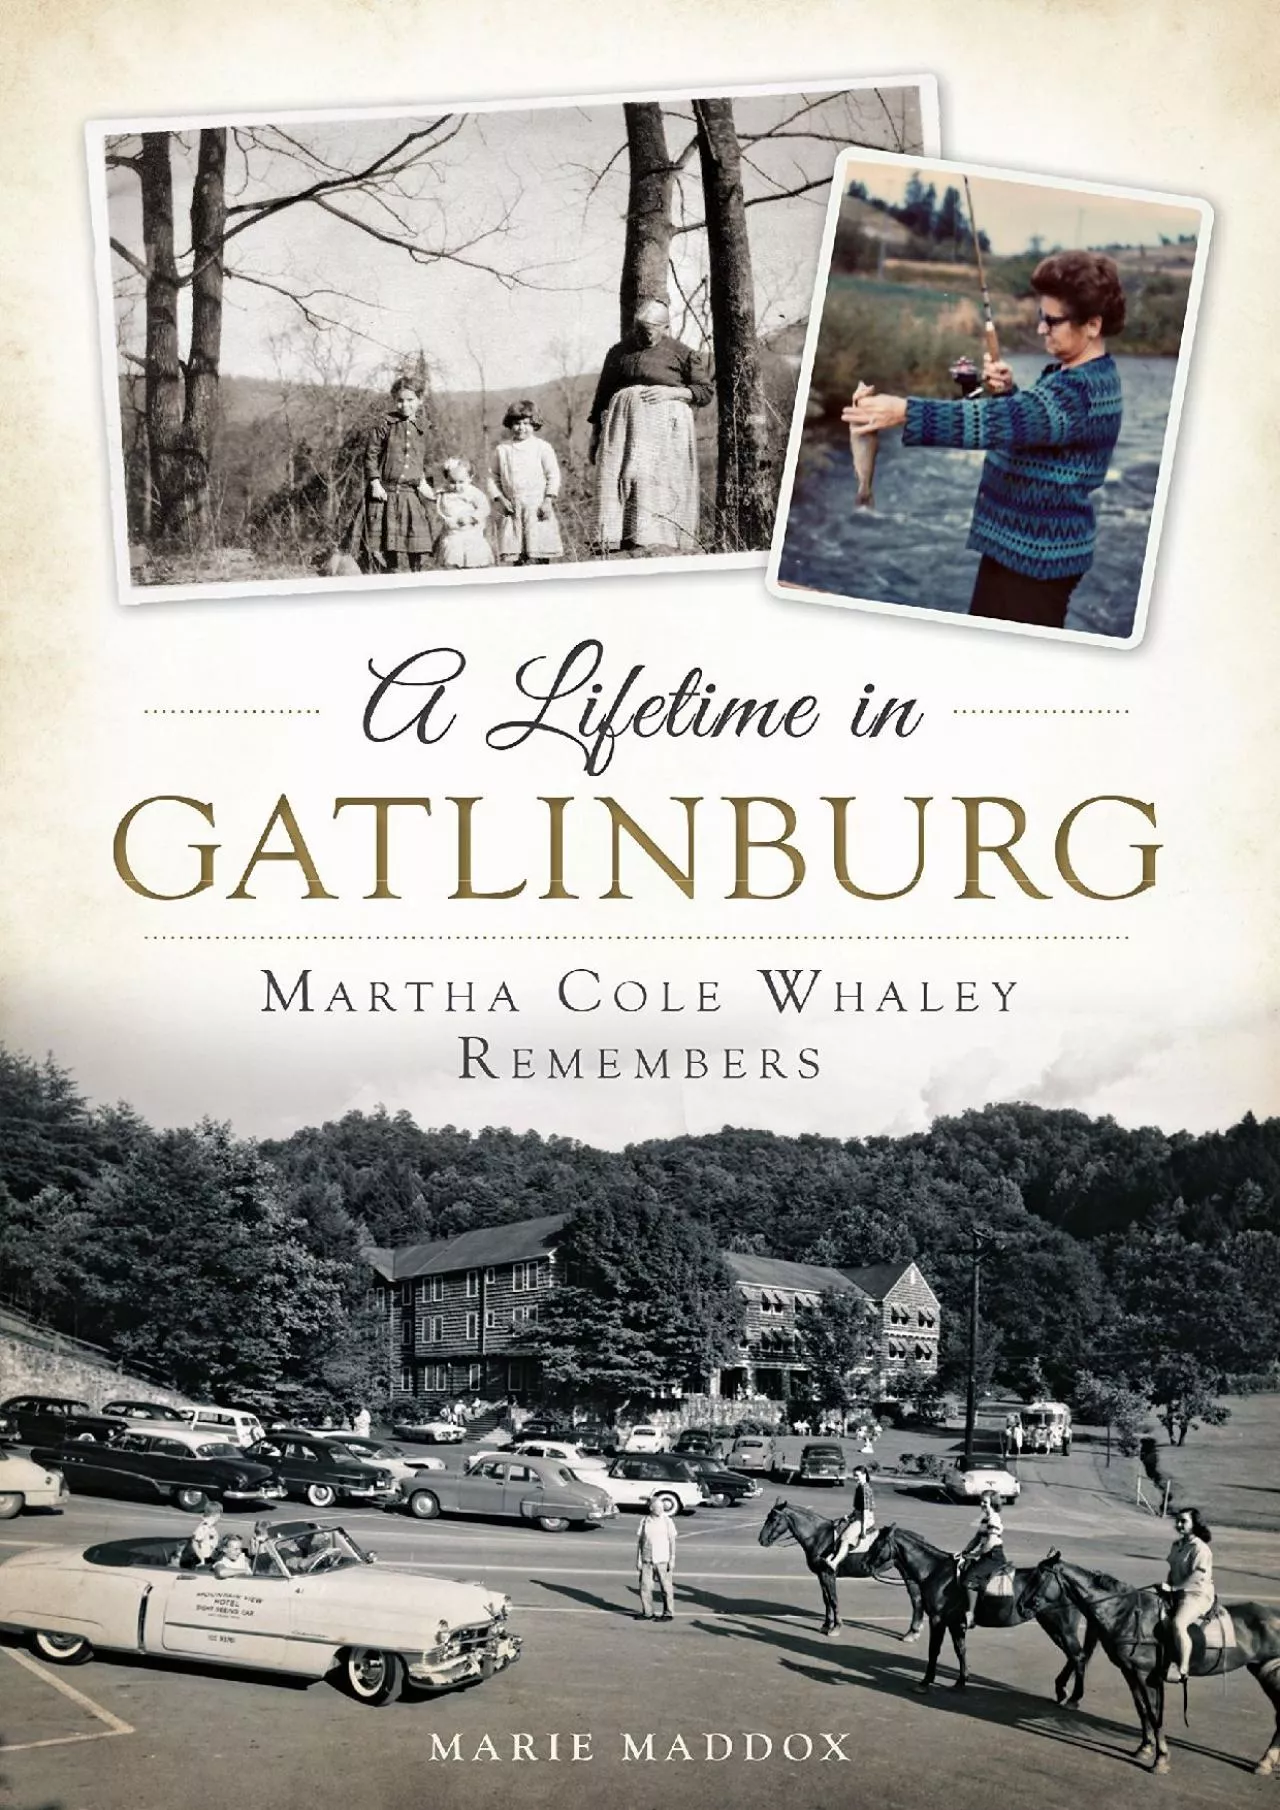 [DOWNLOAD]-A Lifetime in Gatlinburg: Martha Cole Whaley Remembers (American Heritage)